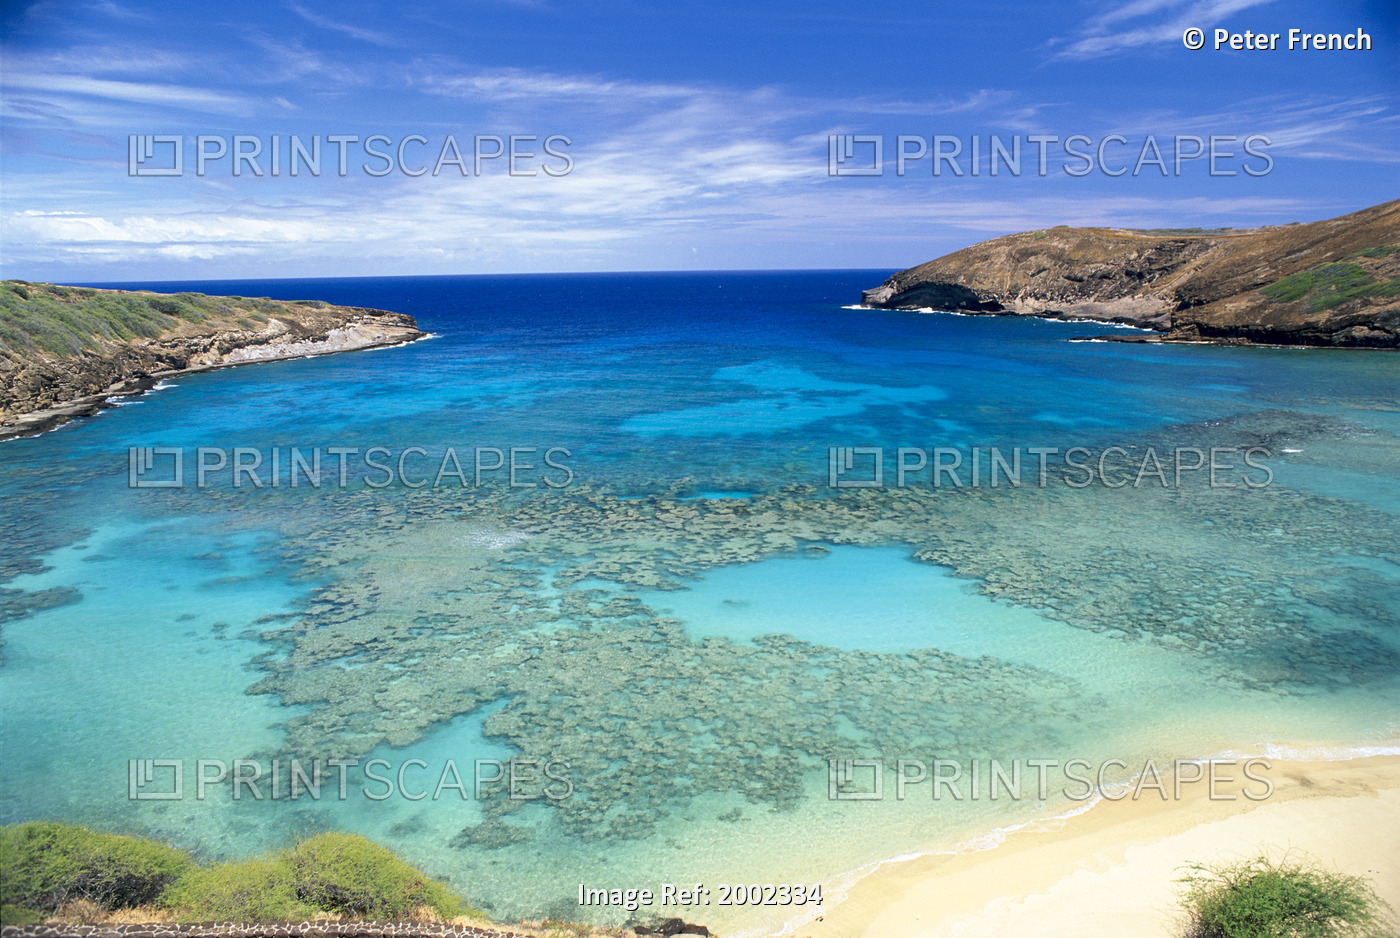 Hawaii, Oahu, Hanauma Bay State Park, View From Above Looking Into Coral Waters